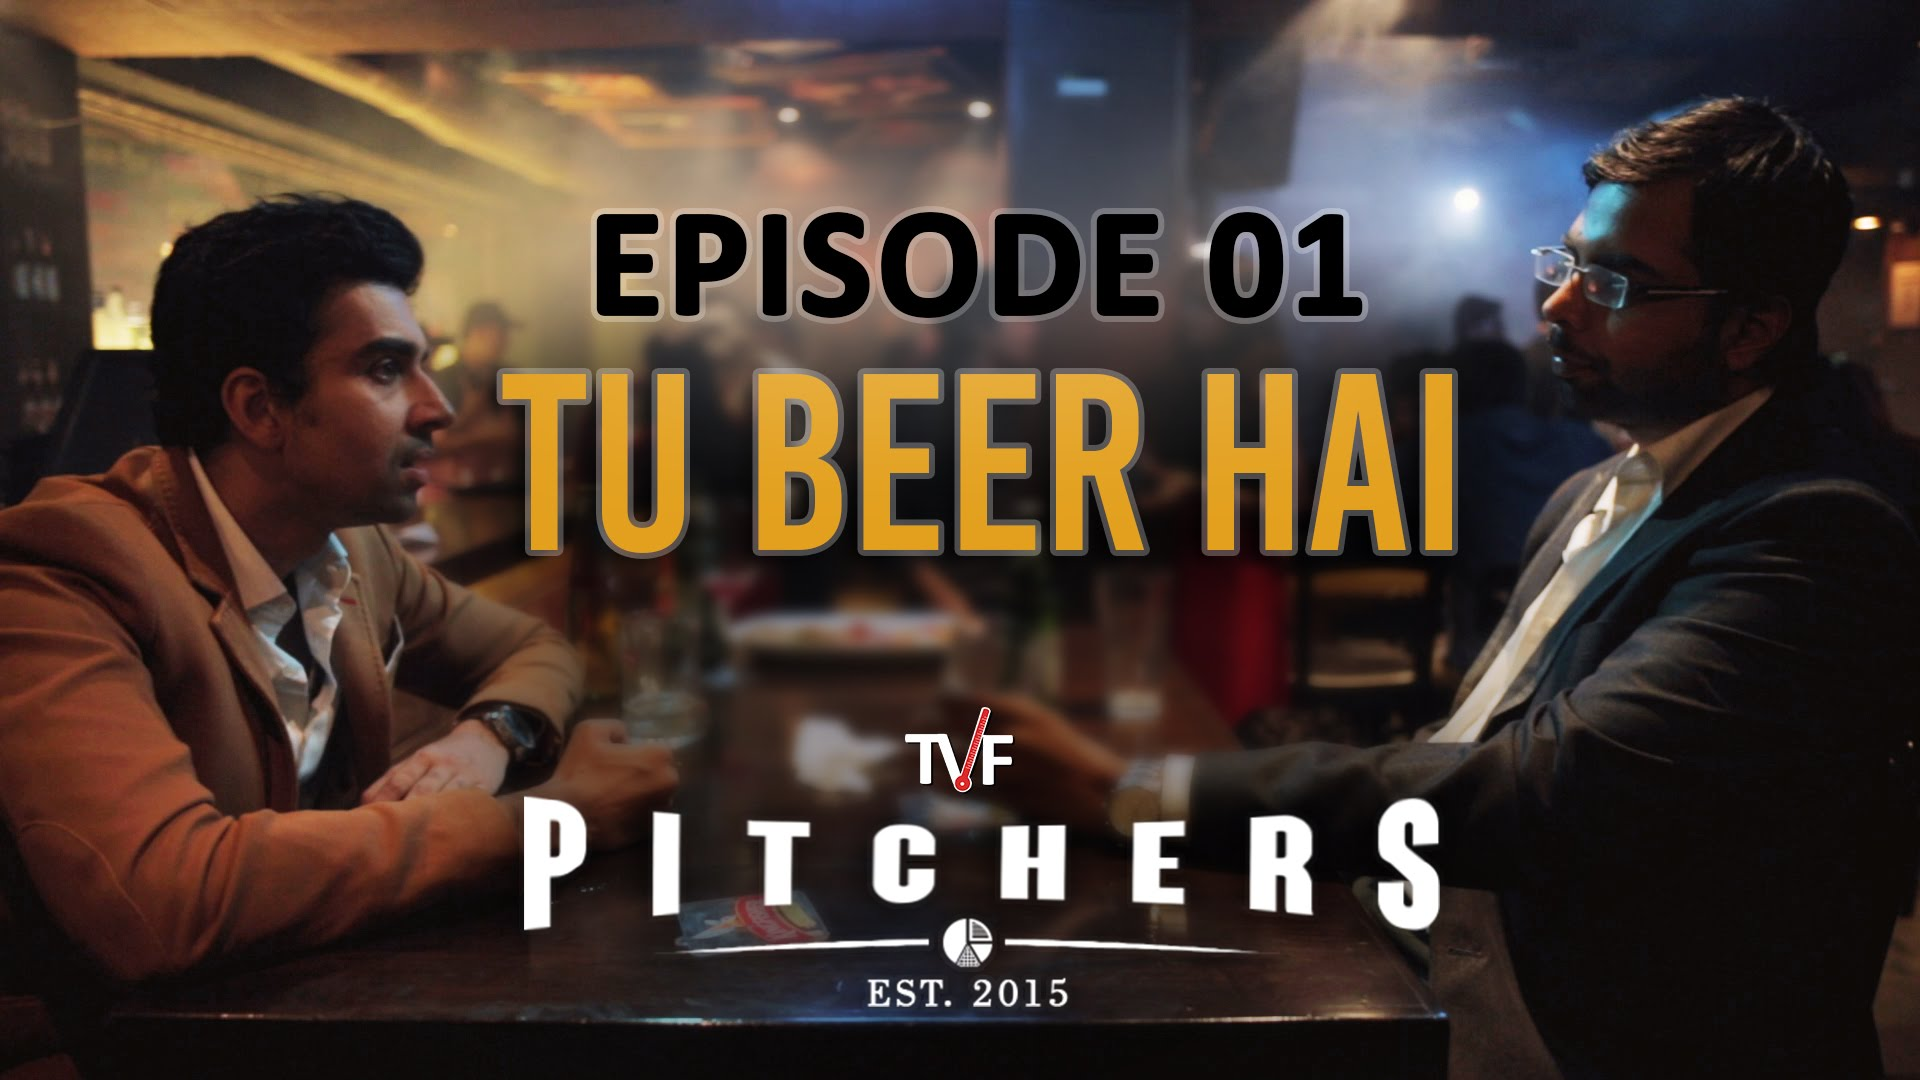 watch tvf pitchers episode 5 without sign up